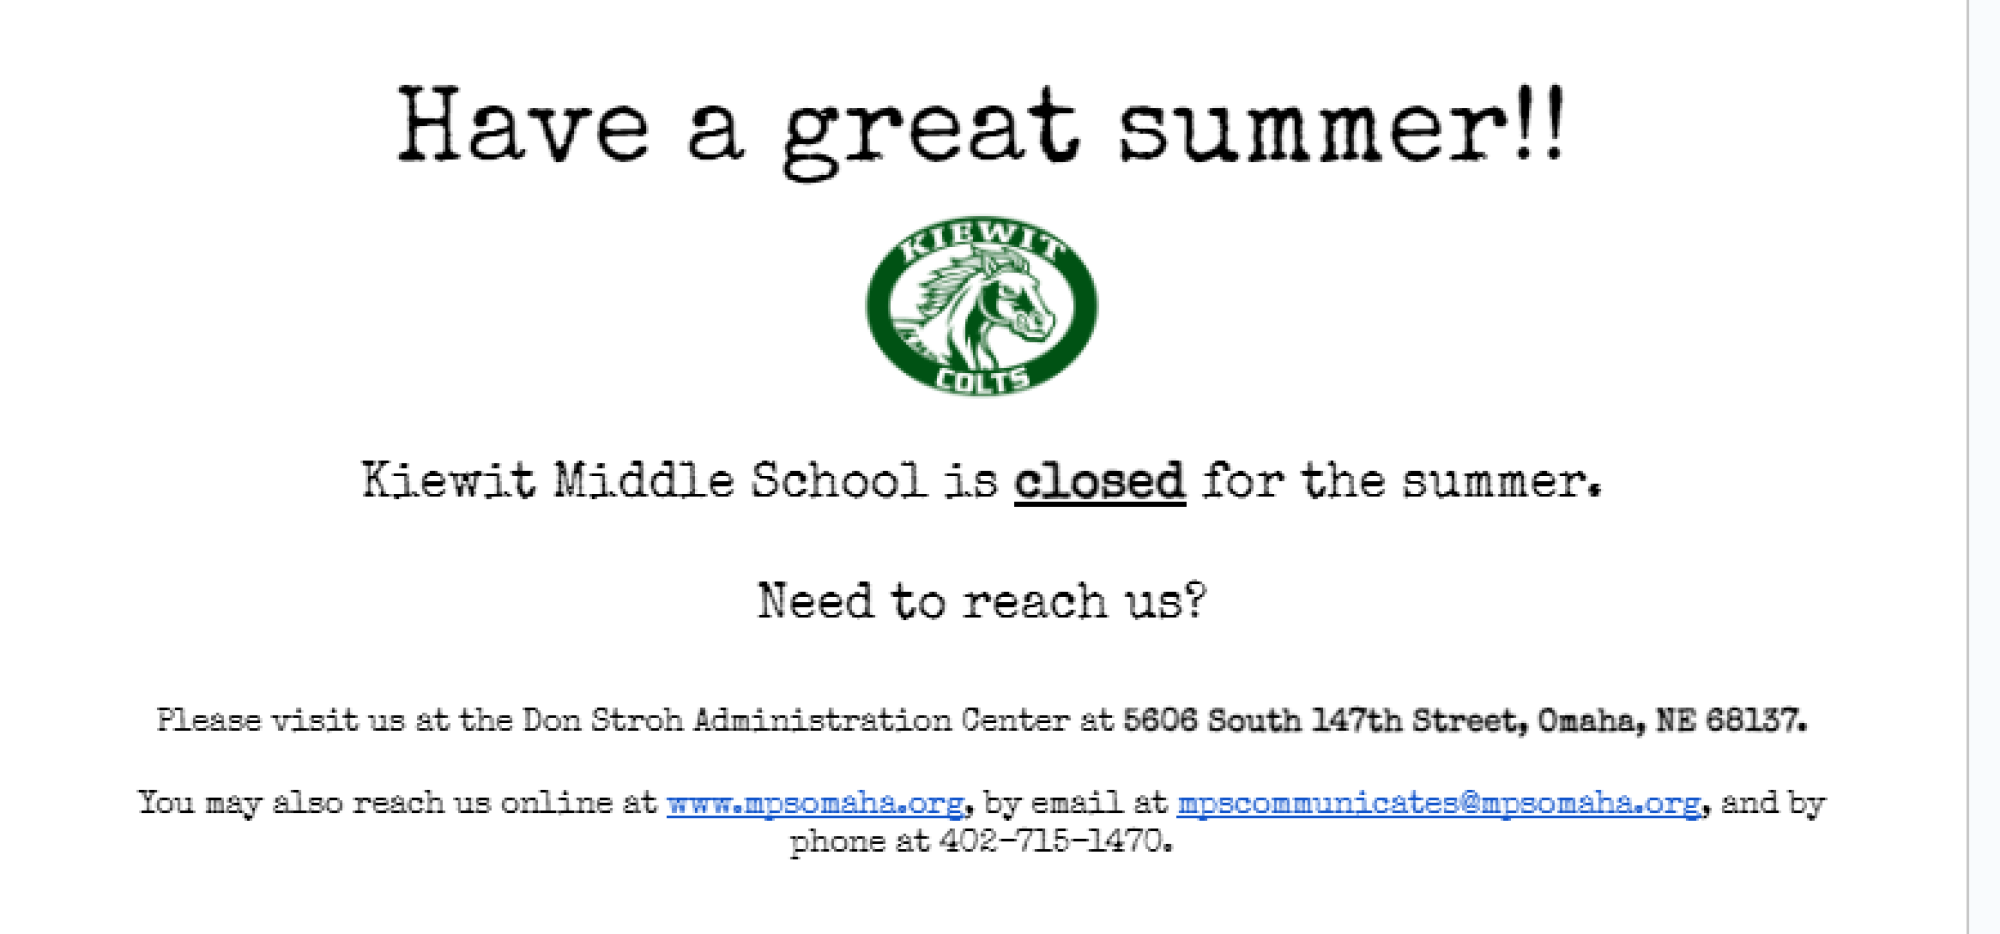 Have a great summer!!   Kiewit Middle School is closed for the summer.  Need to reach us?  Please visit us at the Don Stroh Administration Center at 5606 South 147th Street, Omaha, NE 68137.  You may also reach us online at www.mpsomaha.org, by email at mpscommunicates@mpsomaha.org, and by phone at 402-715-1470.